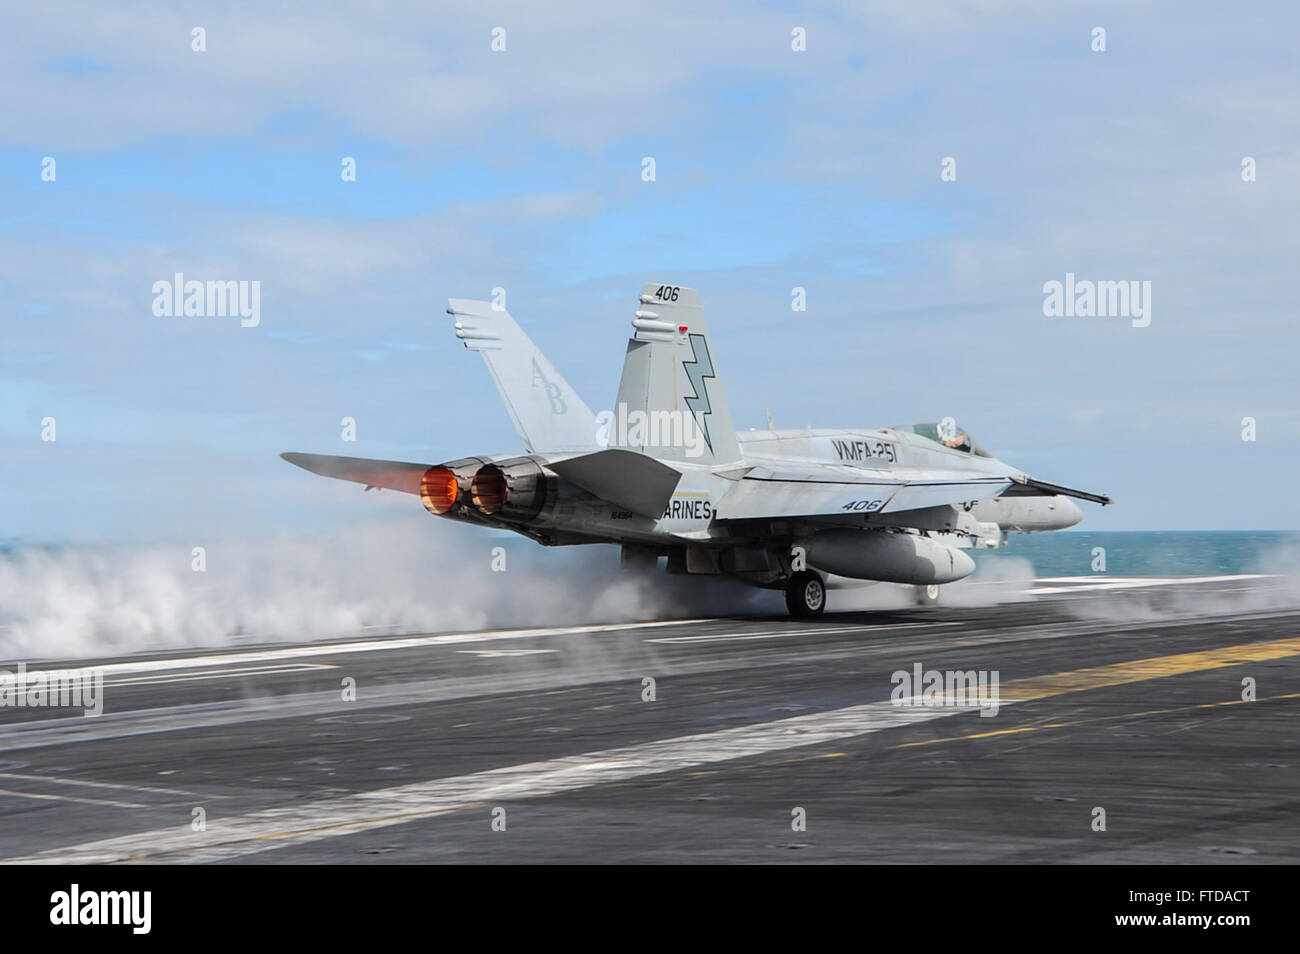 150322-N-ZF498-226 ATLANTIC OCEAN (March 22, 2015) An F/A-18C Hornet assigned to the “Thunderbolts” of Marine Strike Fighter Attack Squadron (VMFA) 251 launches from the flight deck of the Nimitz-class aircraft carrier USS Theodore Roosevelt (CVN 71) March 22, 2015. Theodore Roosevelt, homeported in Norfolk, is conducting naval operations in the U.S. 6th Fleet area of operations in support of U.S. national security interests in Europe. (U.S. Navy photo by Mass Communication Specialist 3rd Class Anthony N. Hilkowski/Released) Stock Photo